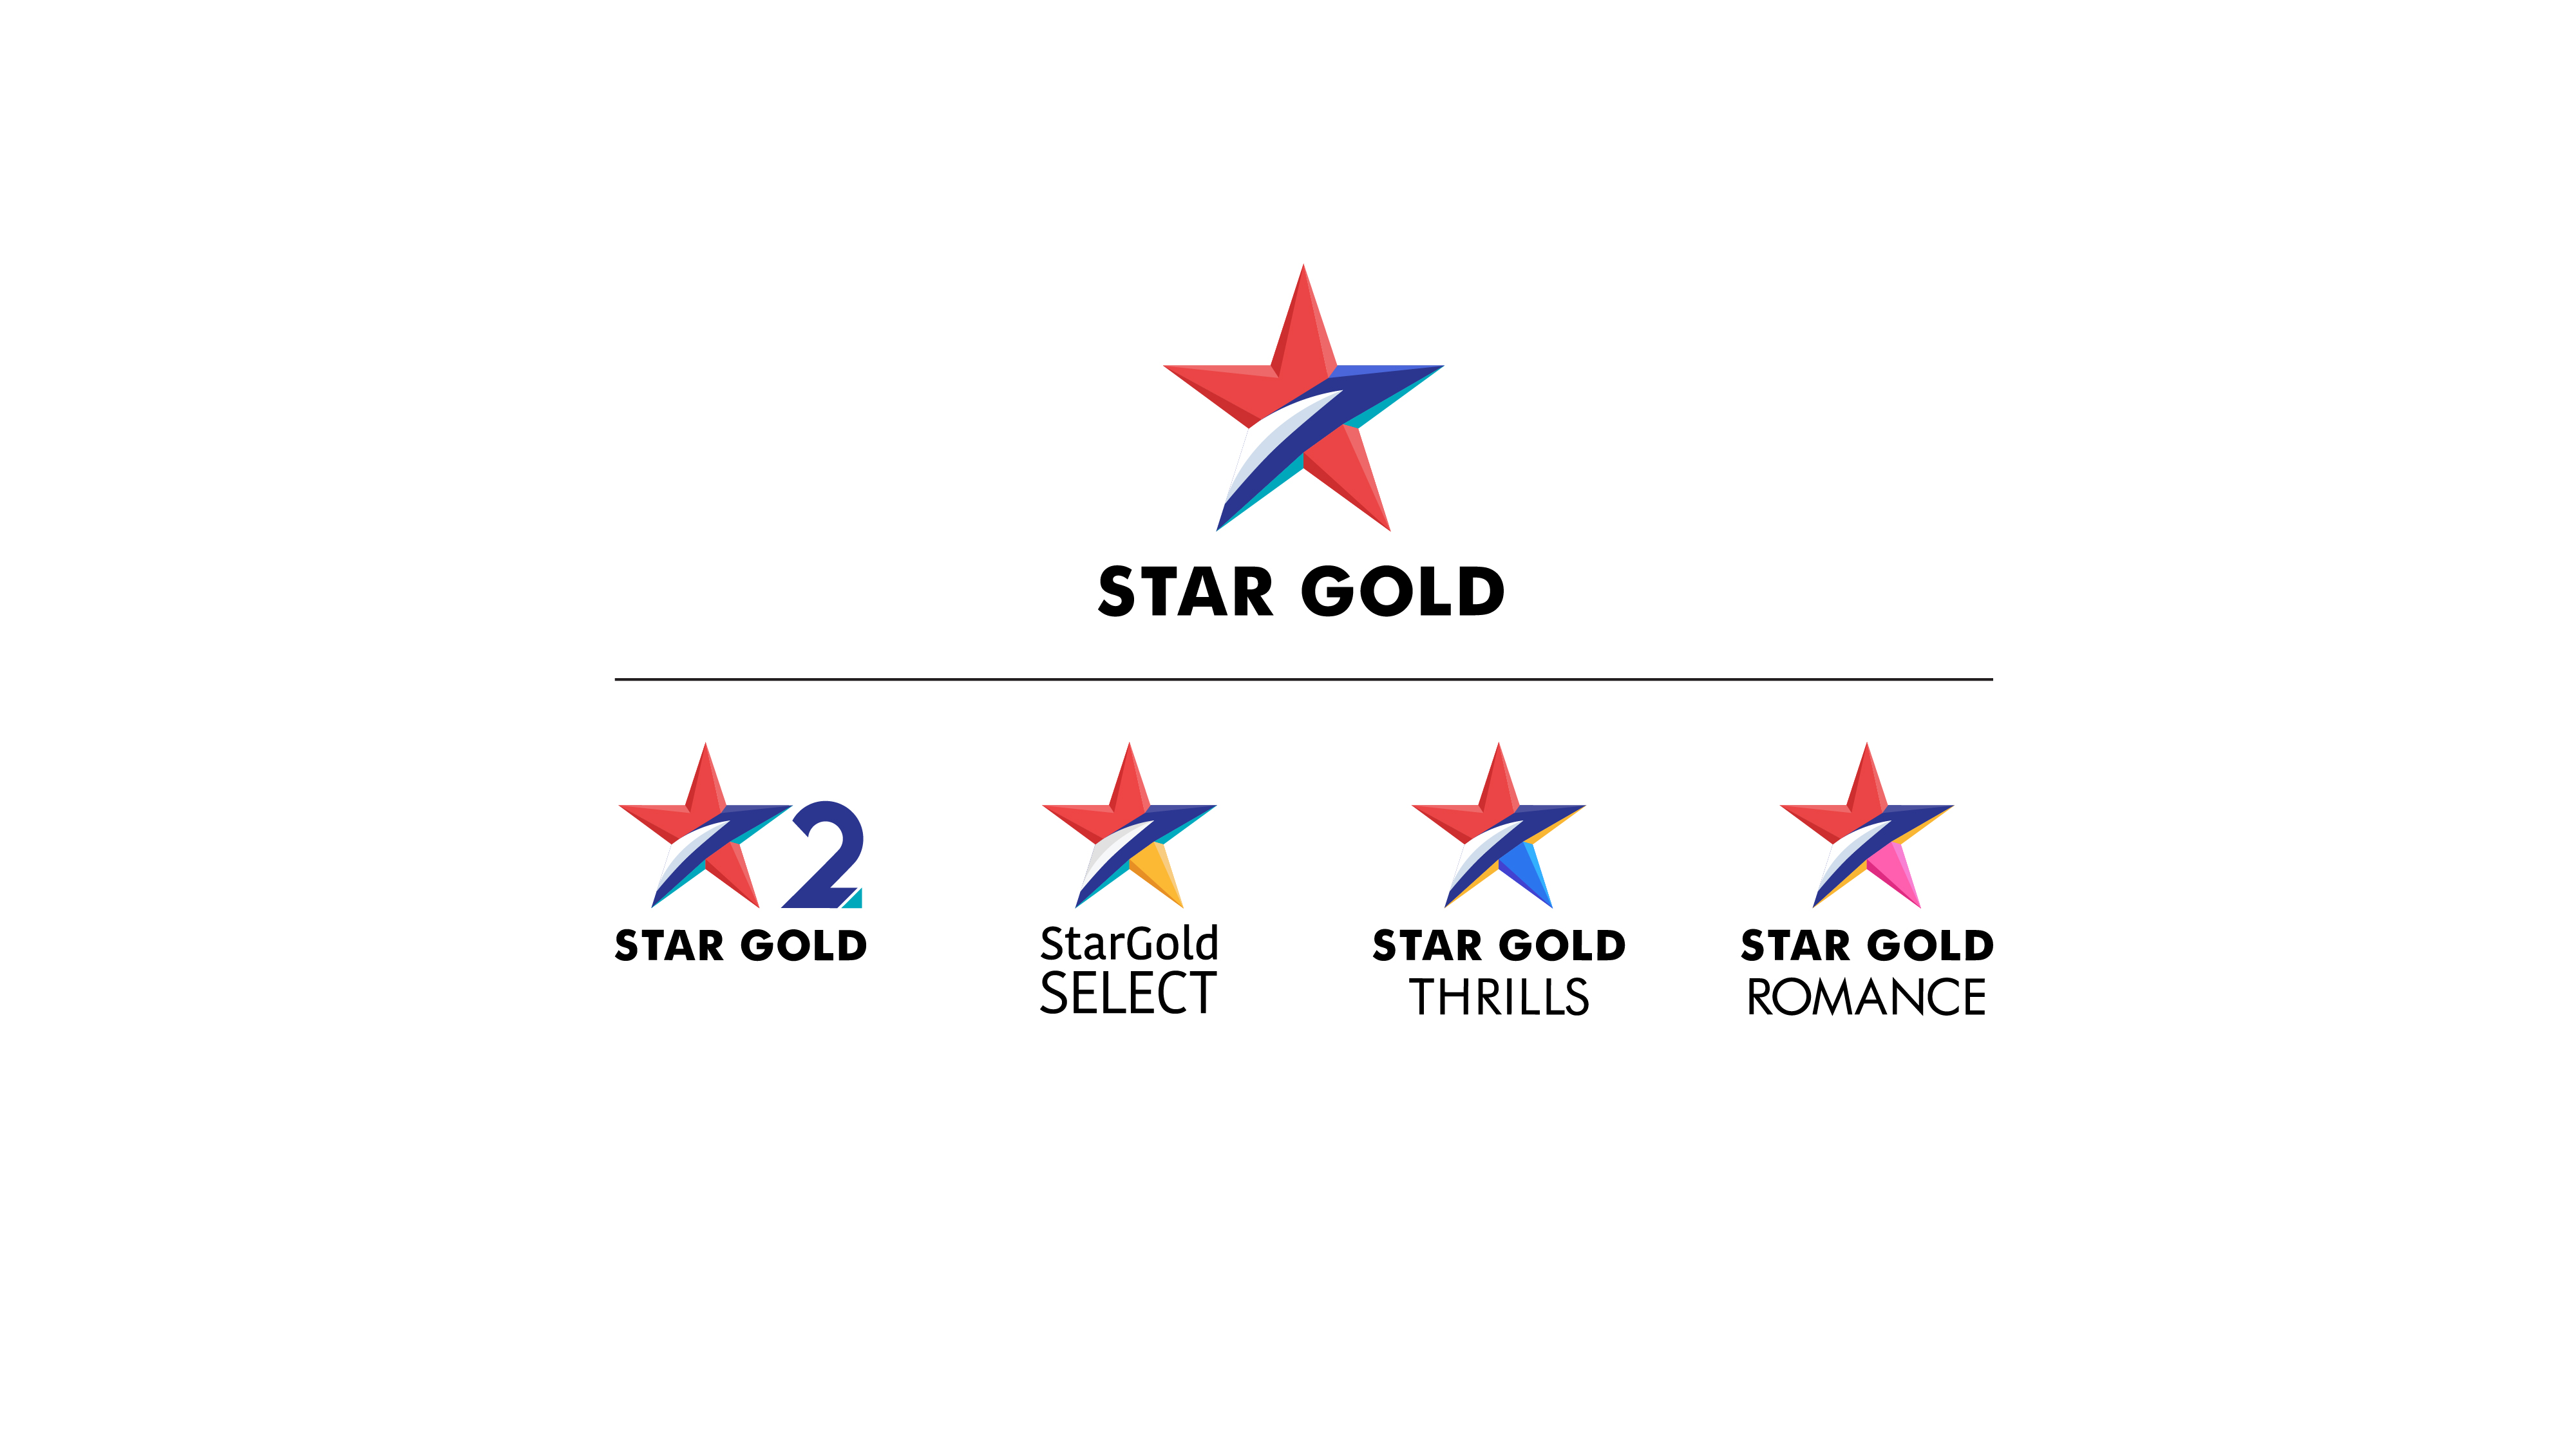 DISNEY STAR NETWORK EXPANDS ITS STAR GOLD PORTFOLIO WITH THE LAUNCH OF STAR GOLD THRILLS AND STAR GOLD ROMANCE